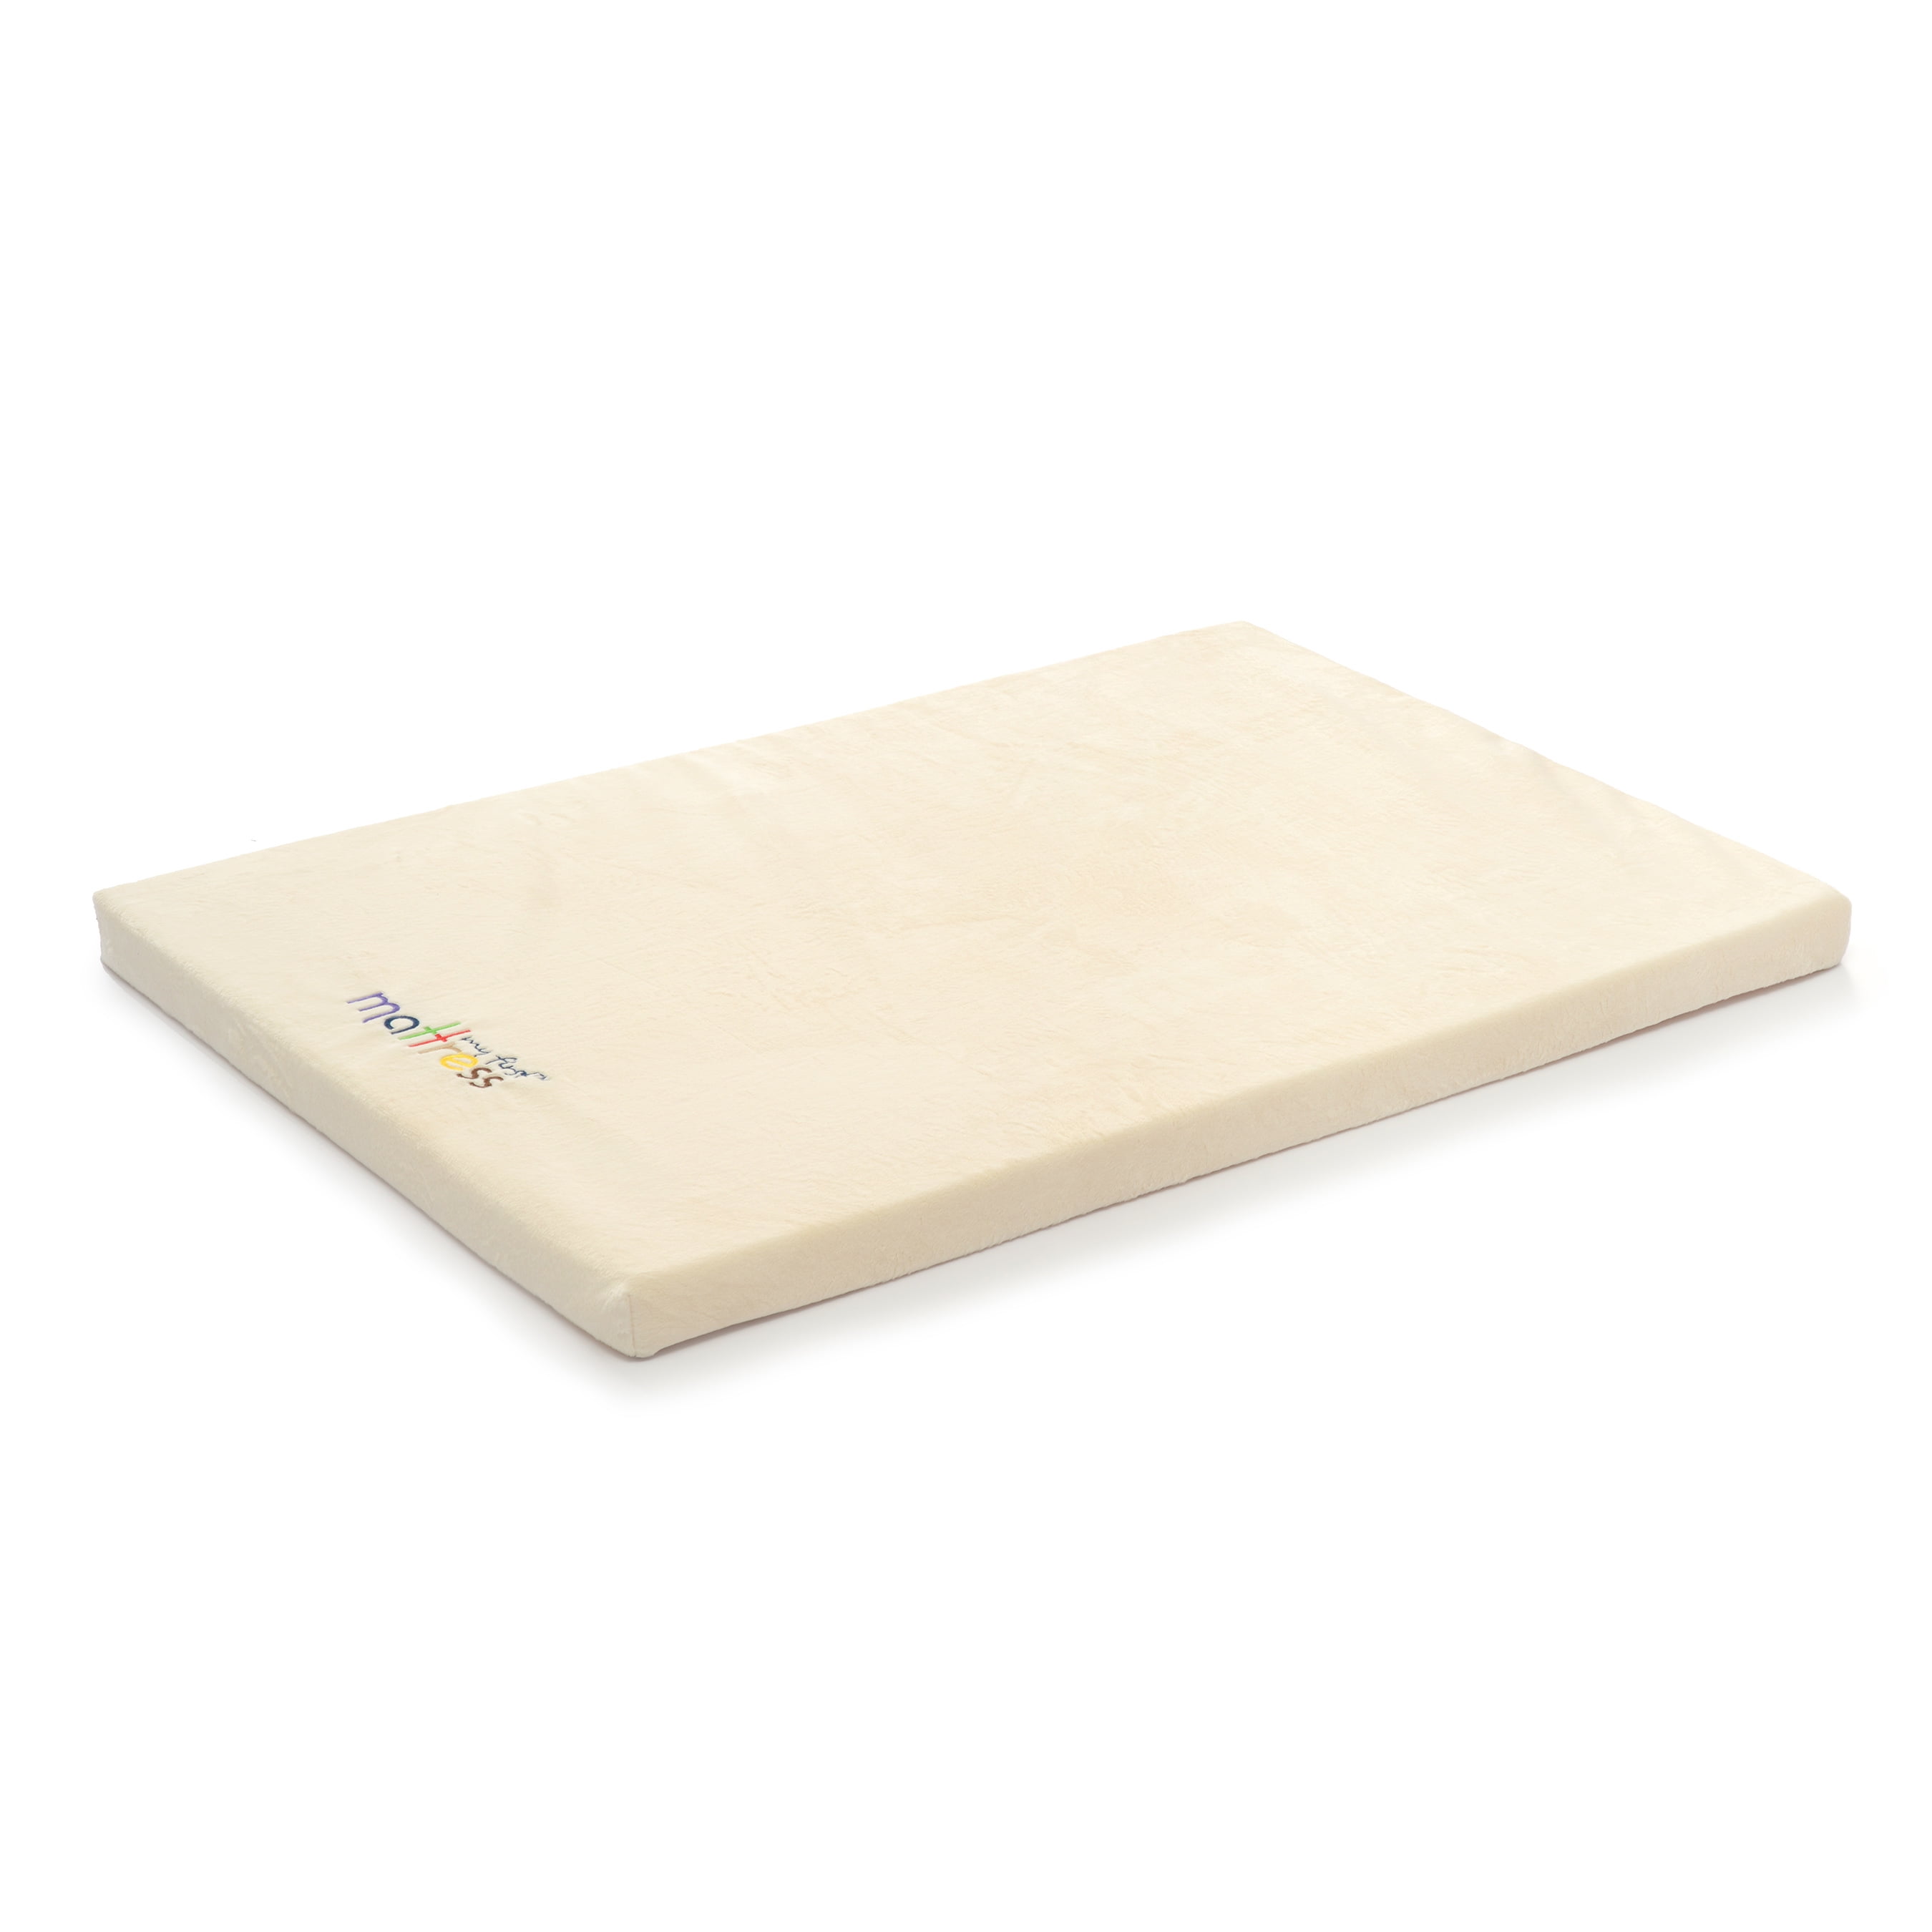 pack and play mattress measurements